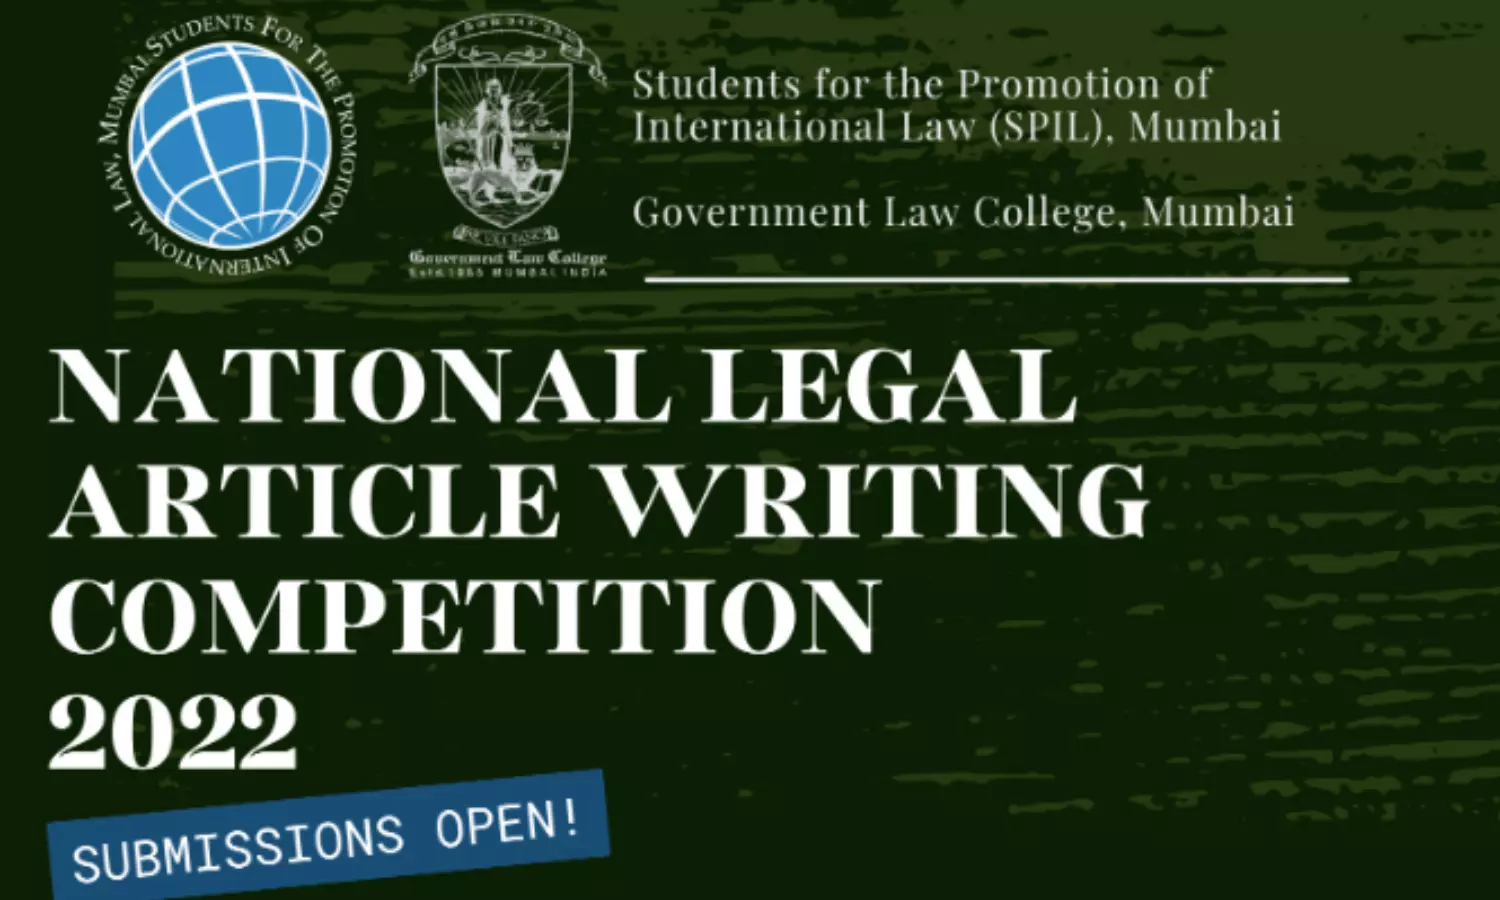 National Legal Article Writing Competition, 2022 | Changing Role of International Sports Law in the 21st Century | SPIL, GLC, Mumbai